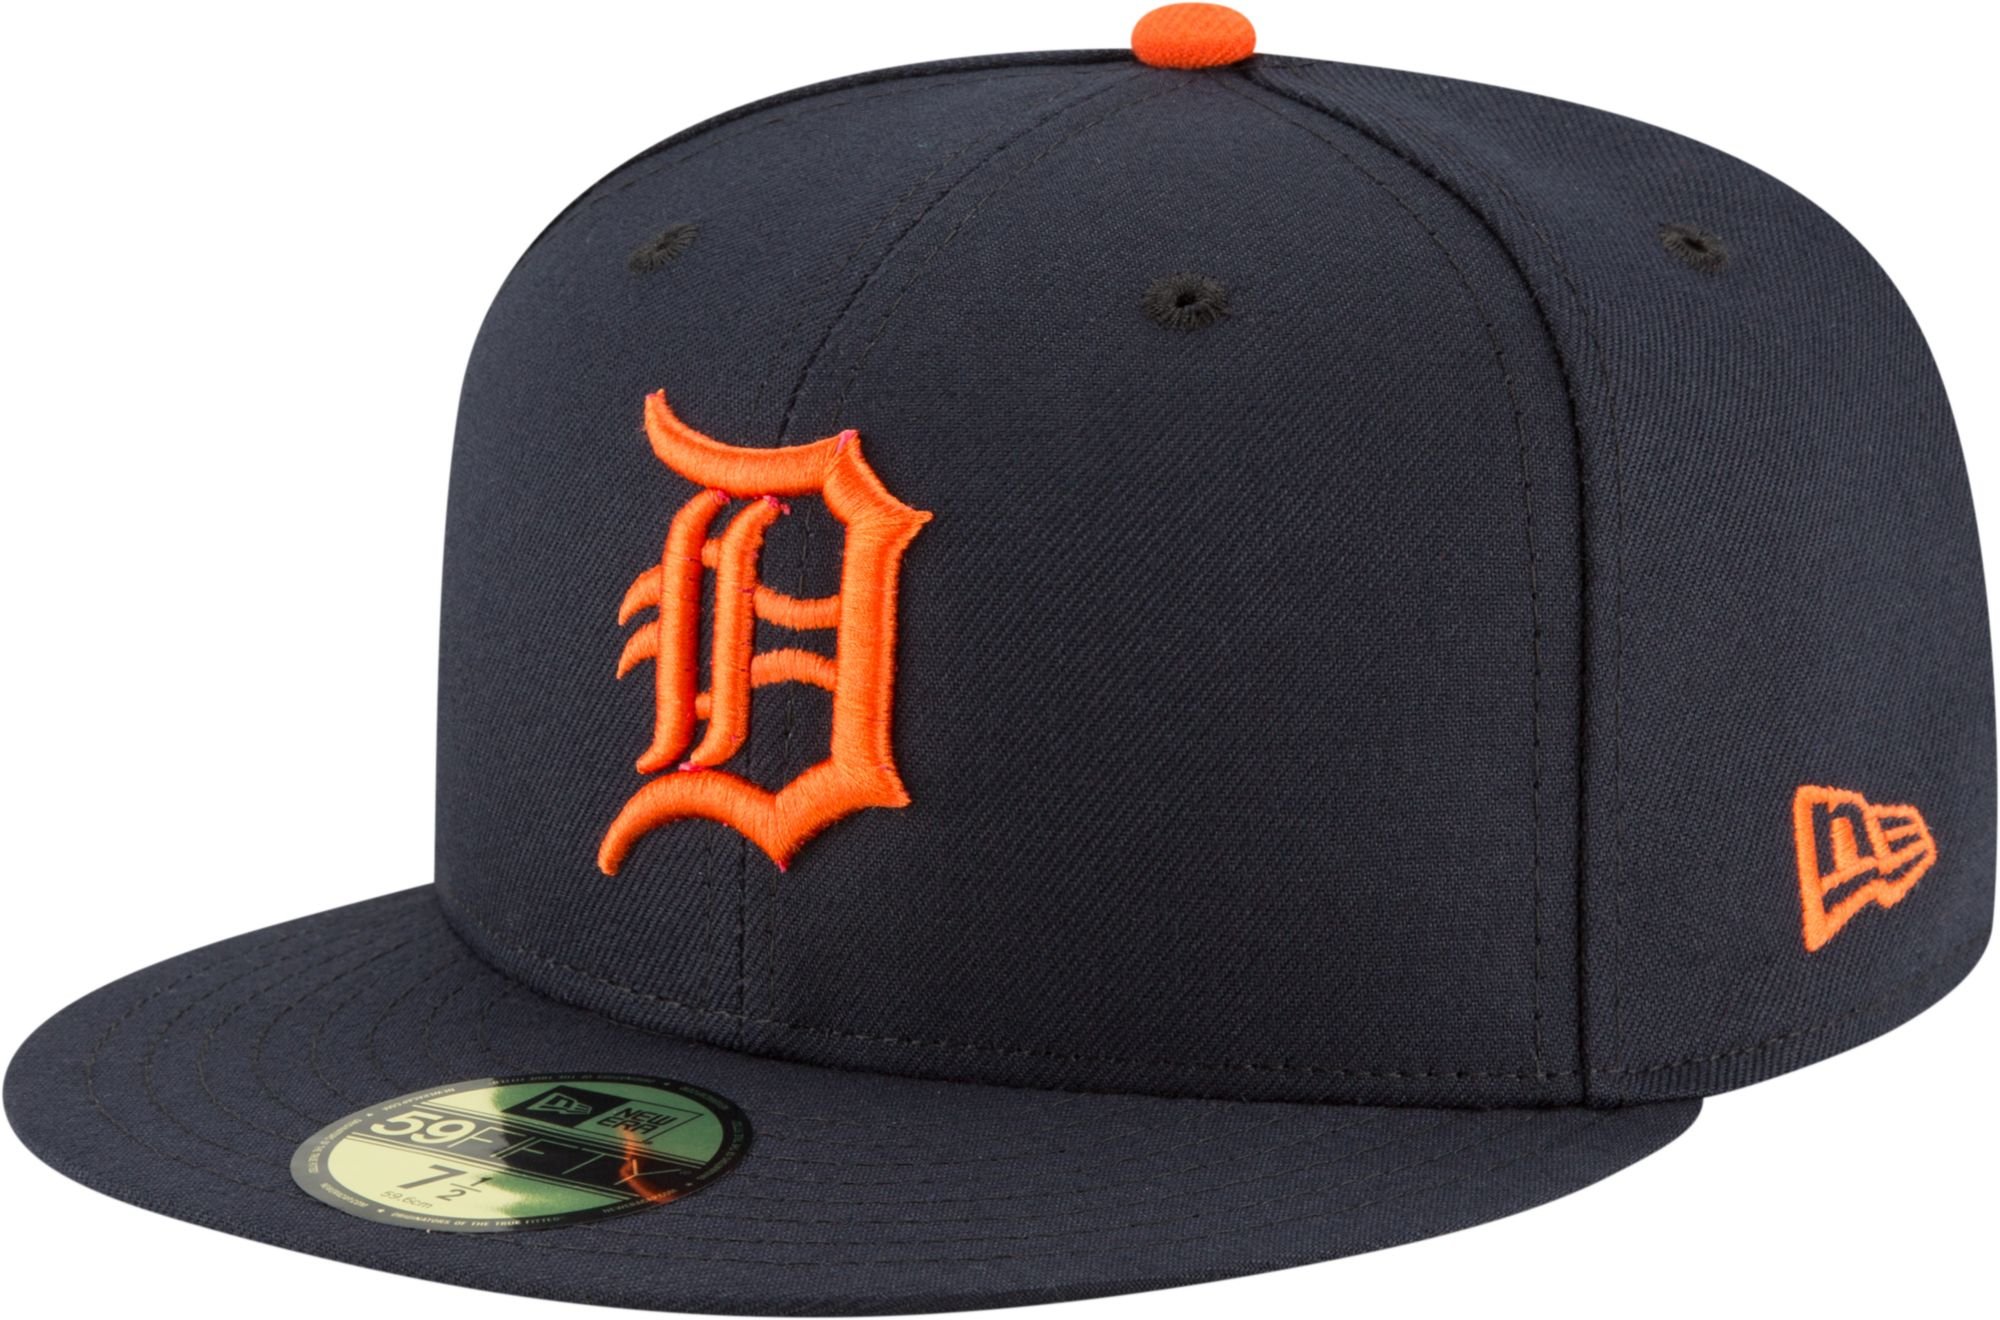 New Era MLB Detroit Tigers Authentic On Field Home Navy 59Fifty Cap   Headwear from USA Sports UK